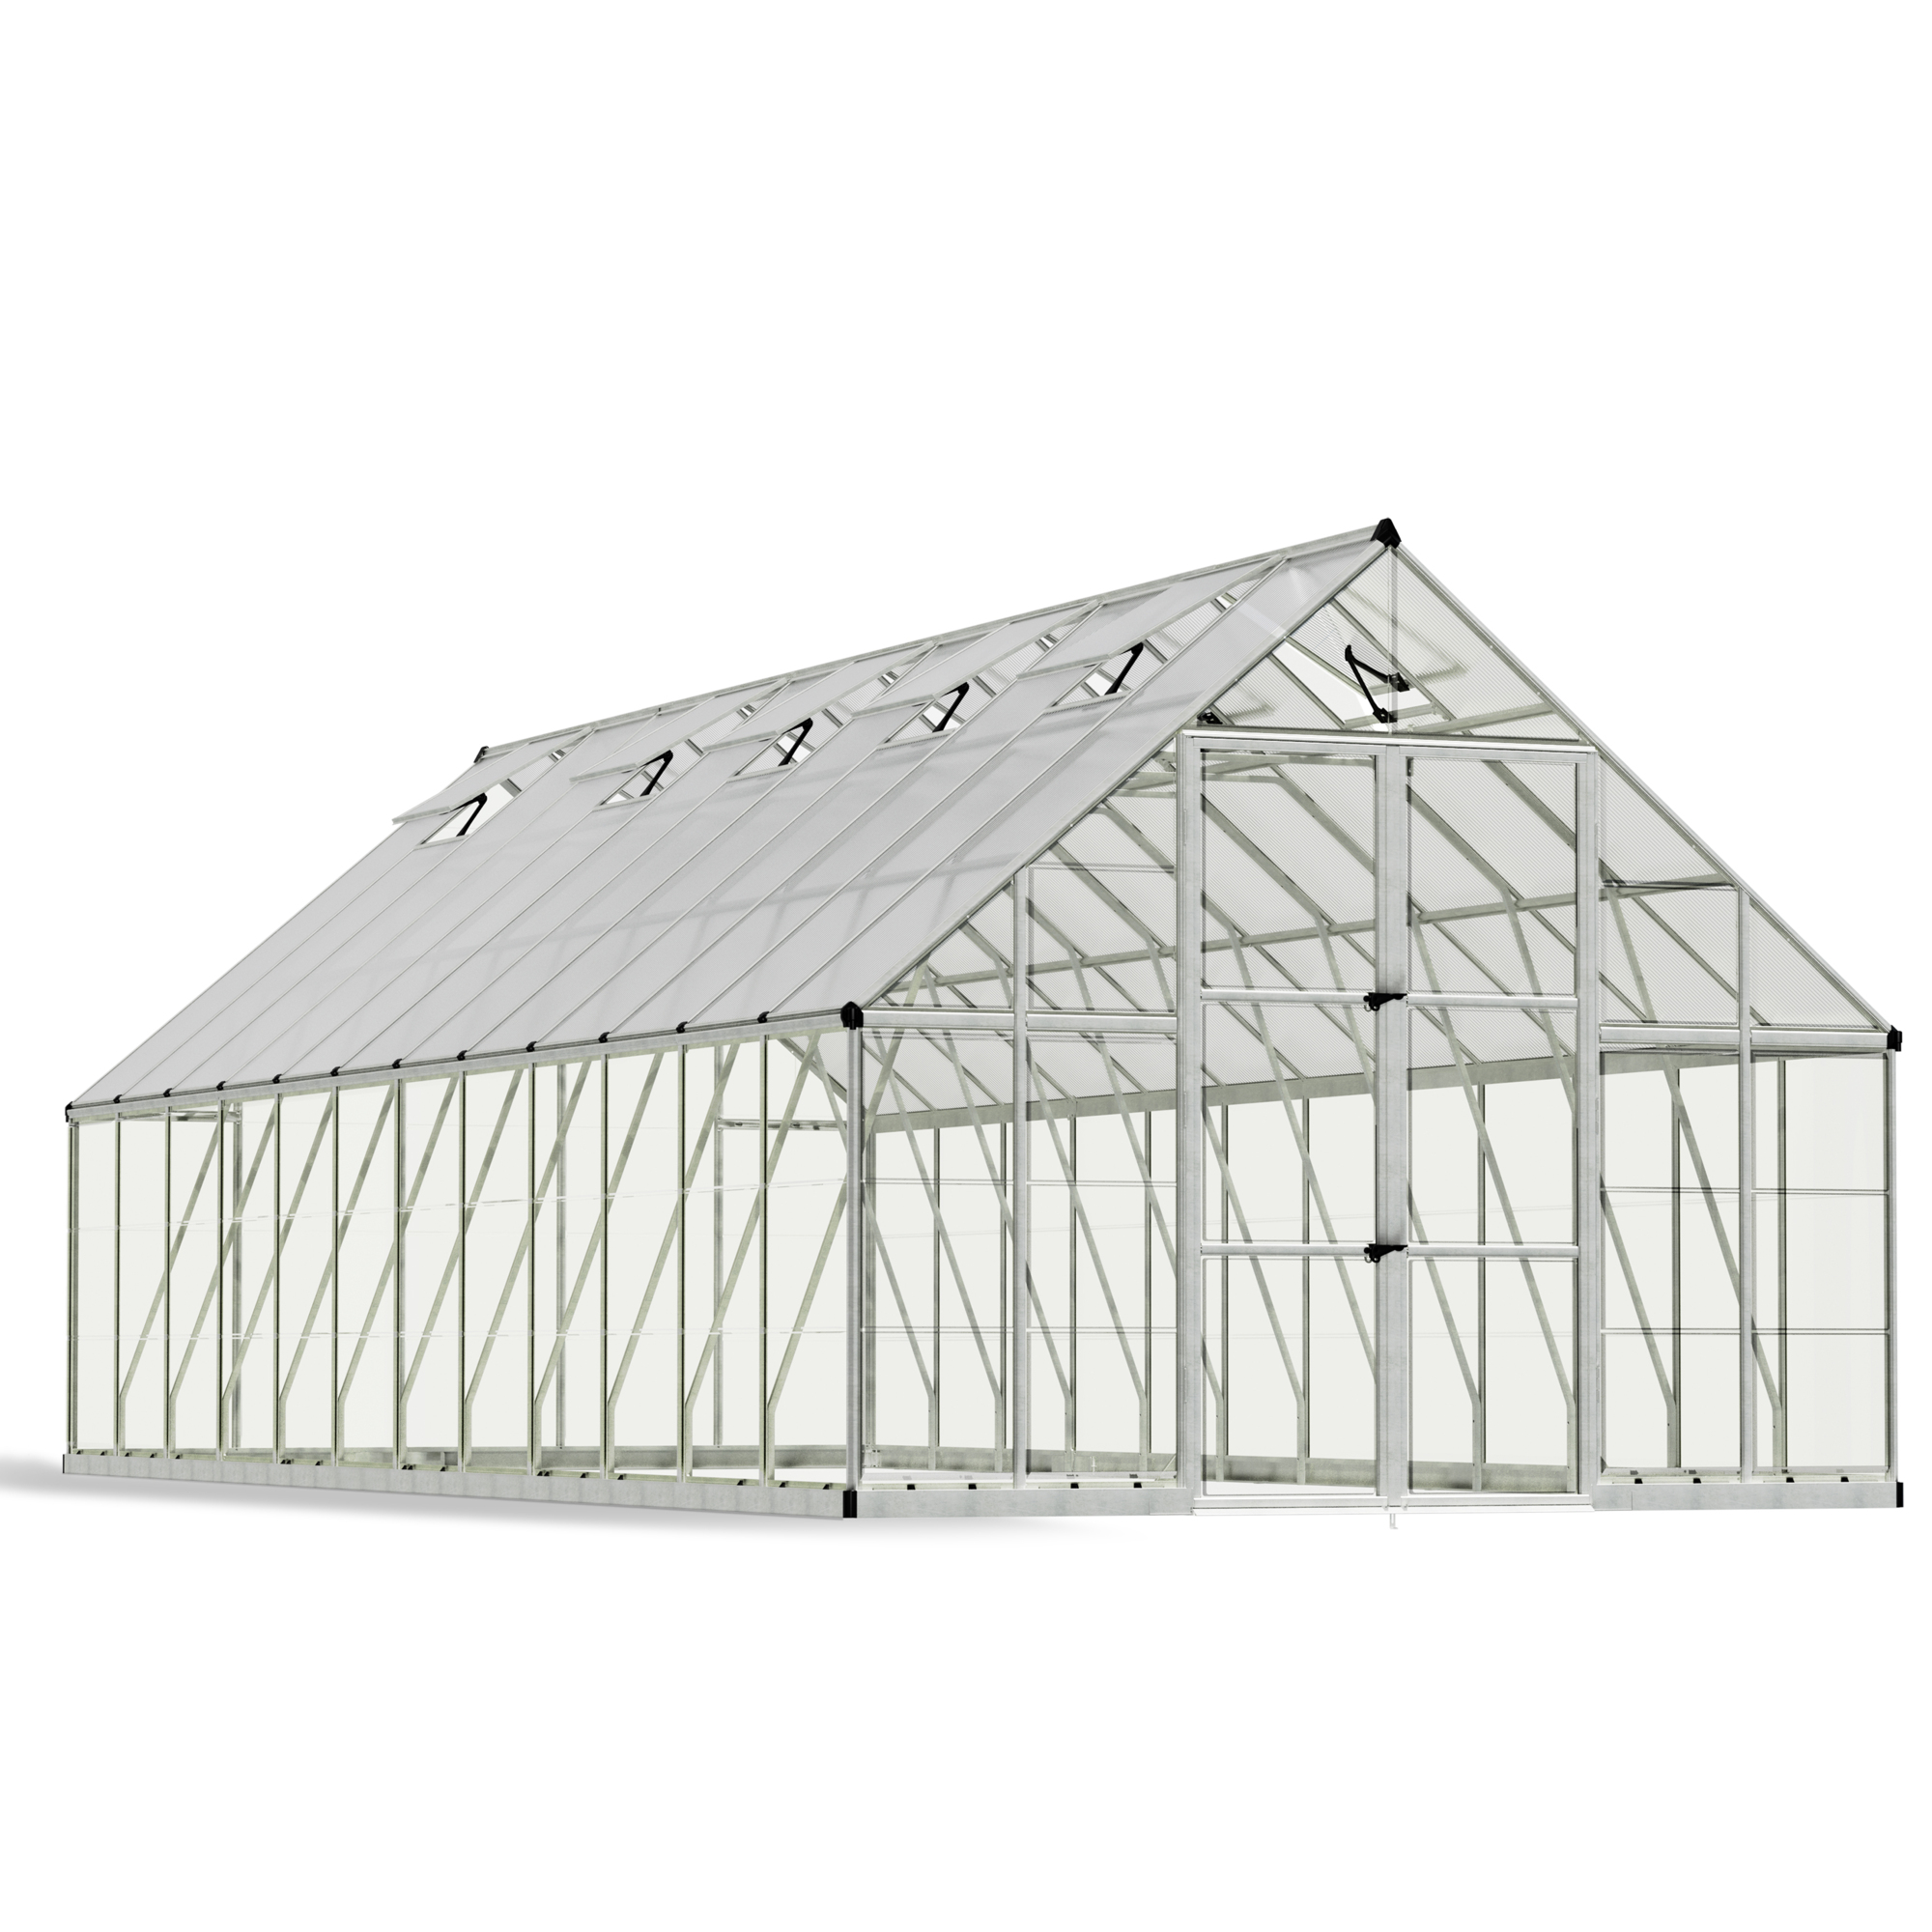 Poly-Tex Inc., Balance 10ft. x 24ft. Greenhouse - Silver, Length 285 in, Width 119.7 in, Center Height 101.2 in, Model 707014